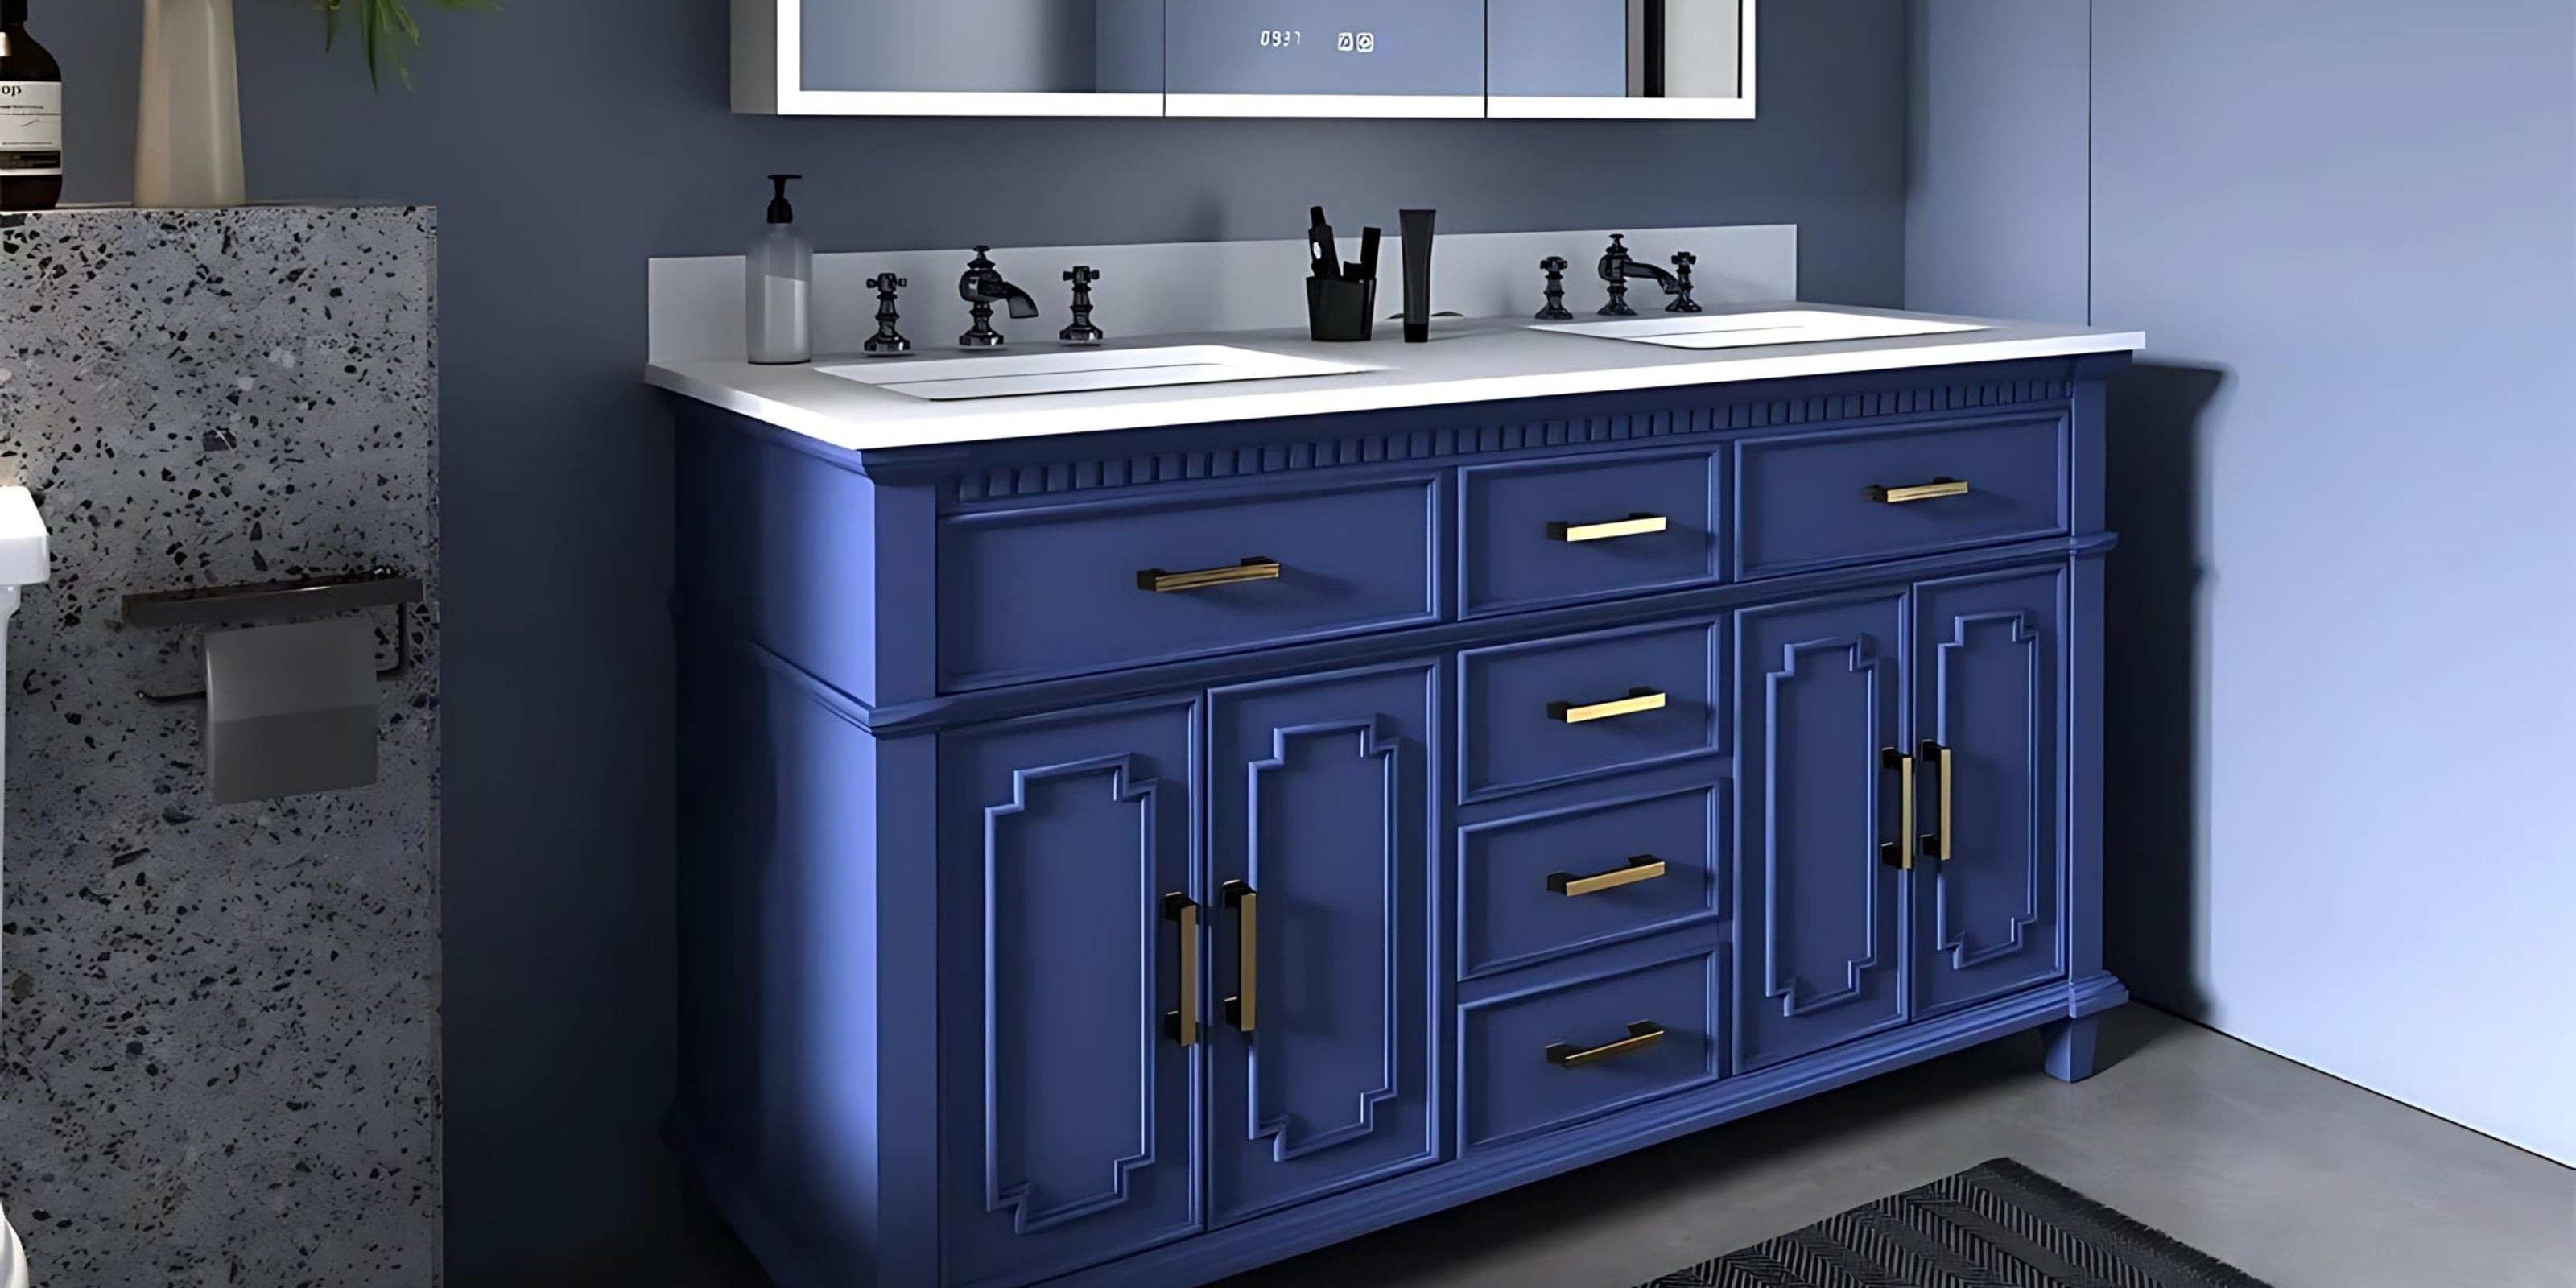 Vanity Plus holds the perfect freestanding bathroom vanity cabinets for your bathroom makeover.